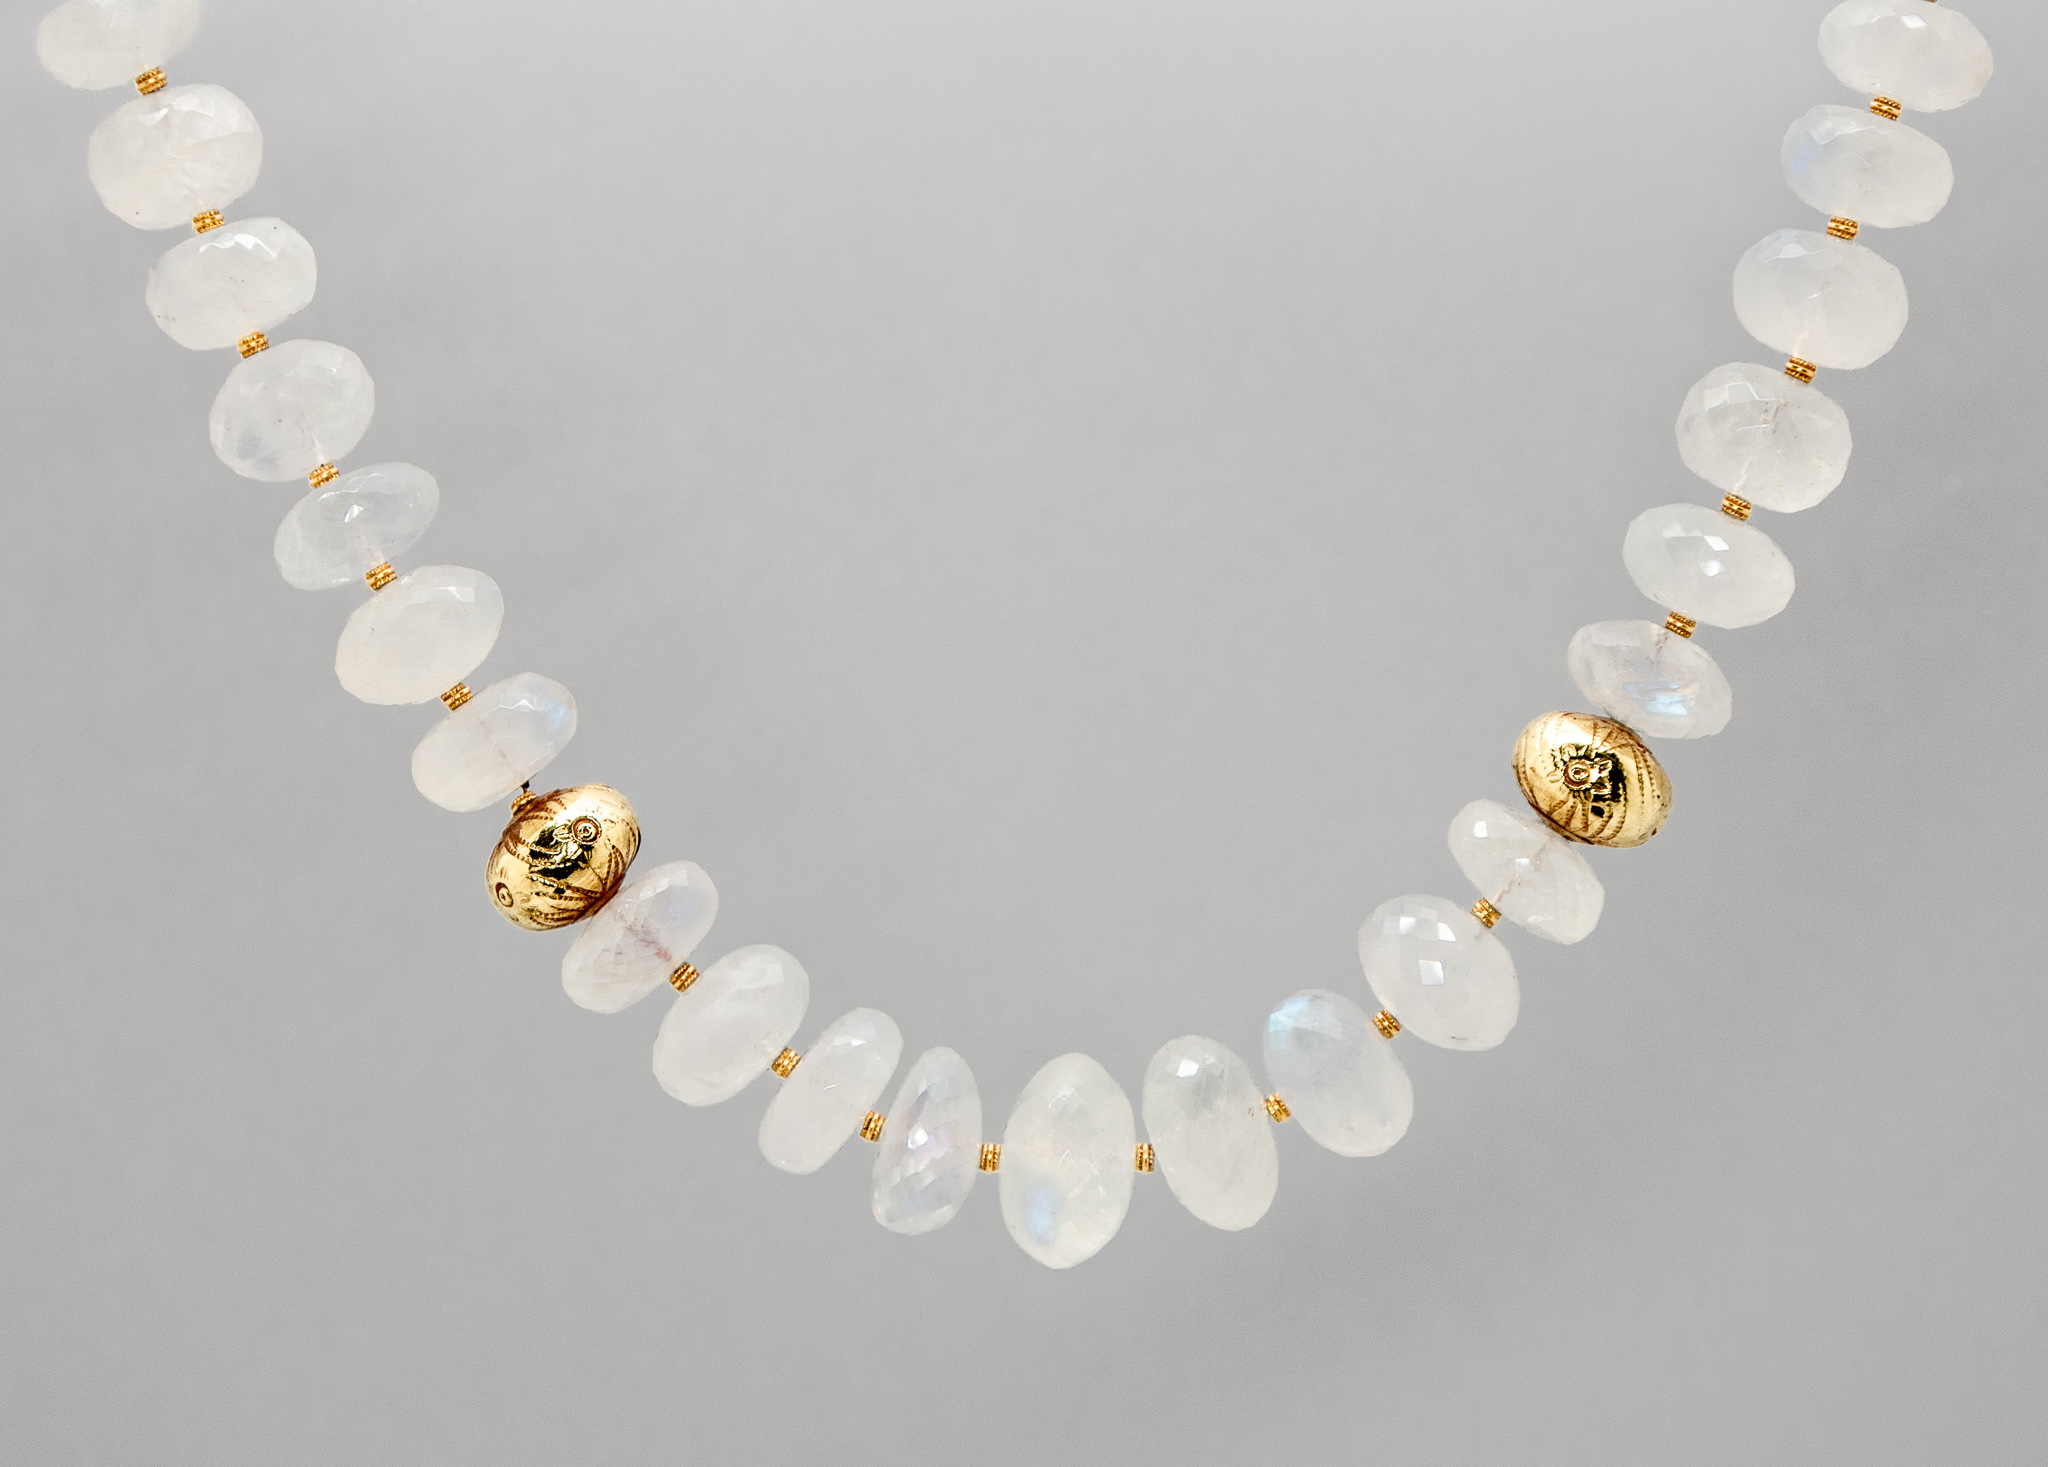 Rainbow flash moonstone faceted rondelle necklace with 18K gold accents